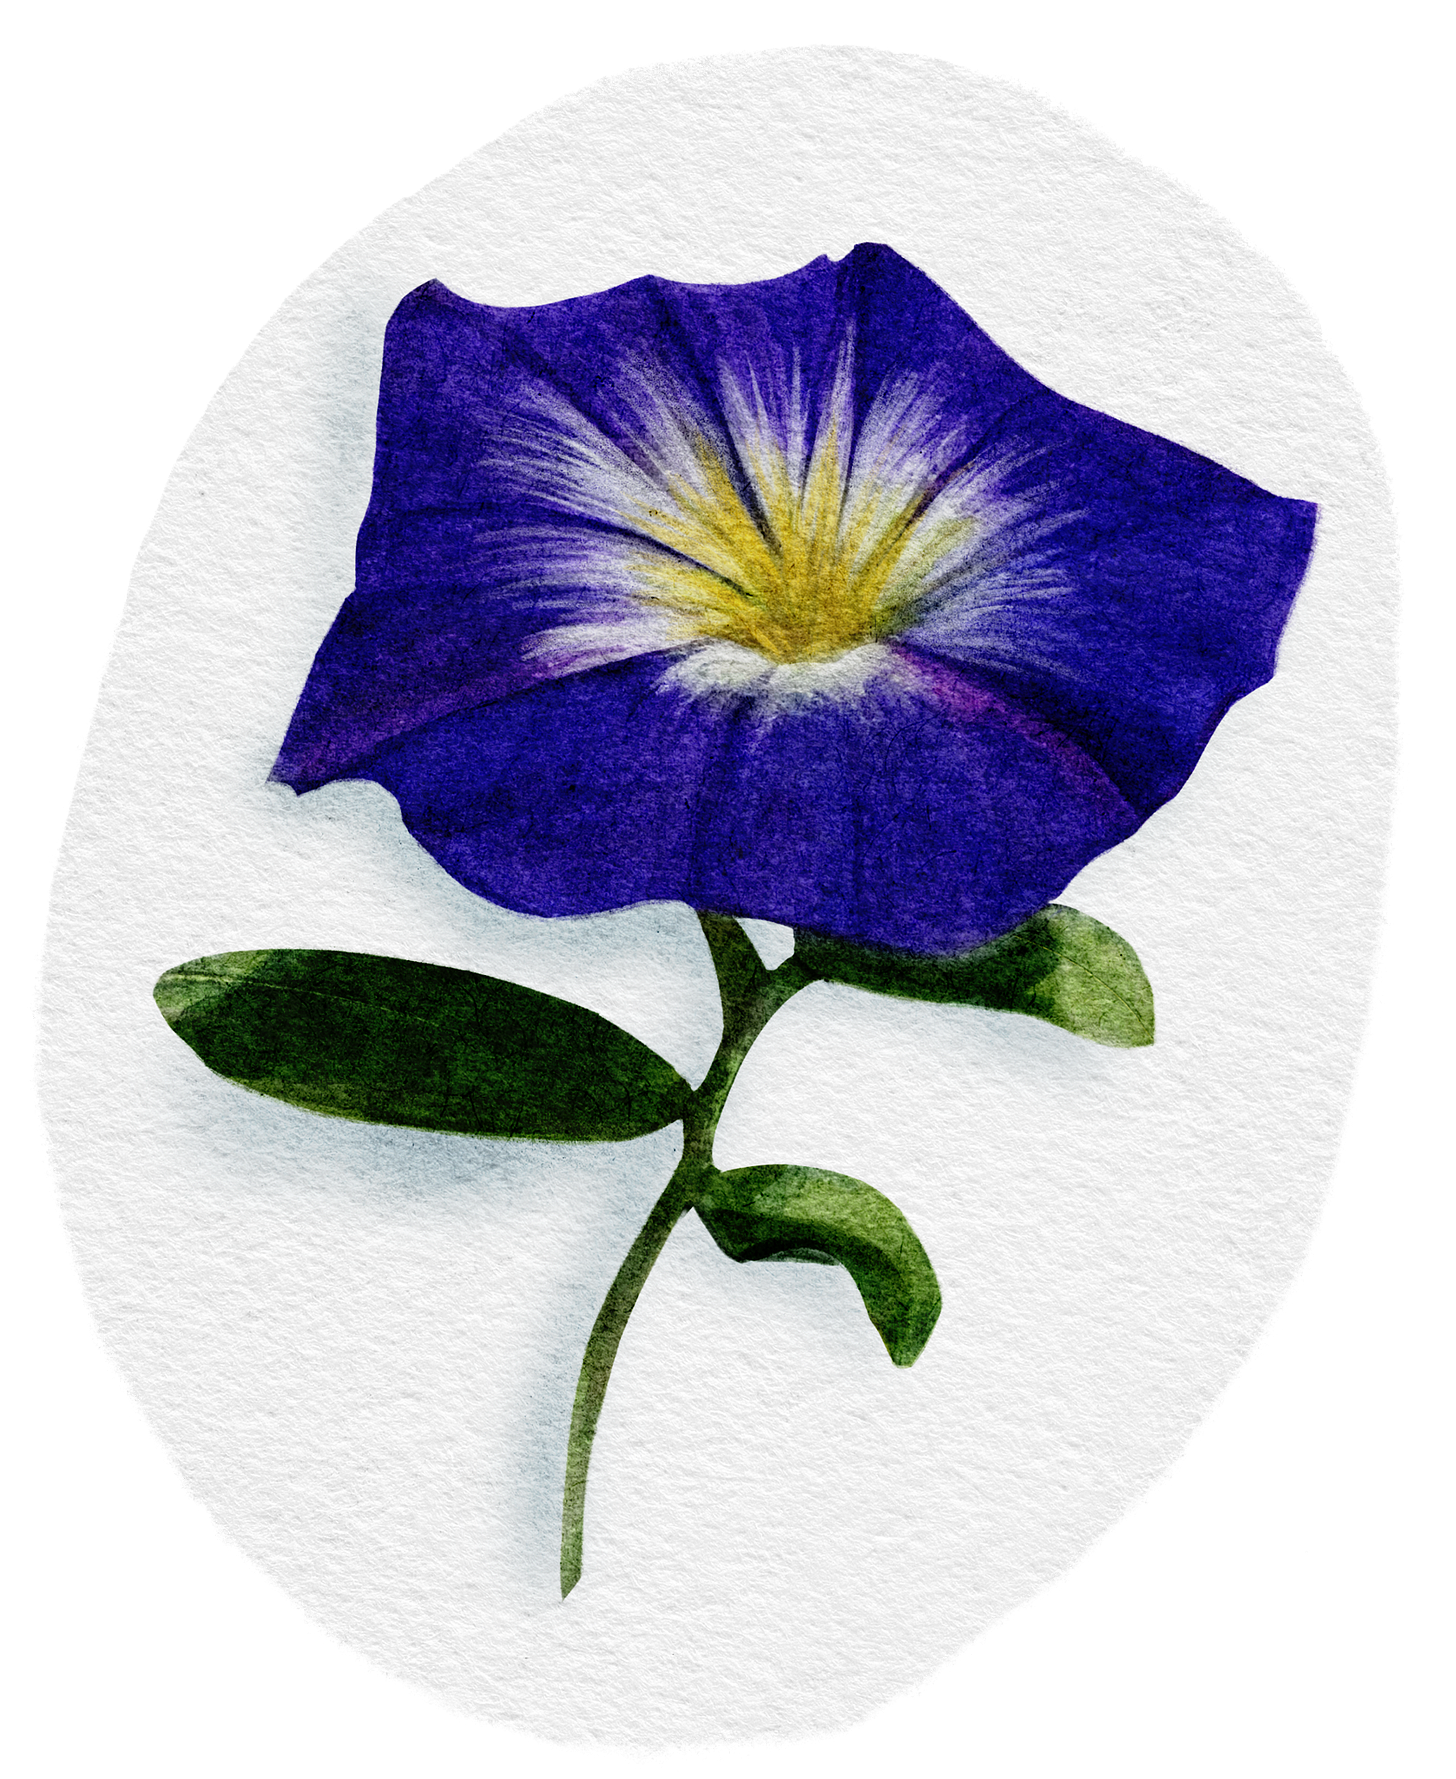 Watercolour painting of a tricolour morning glory flower. Deep purple with yellow and white centre. 